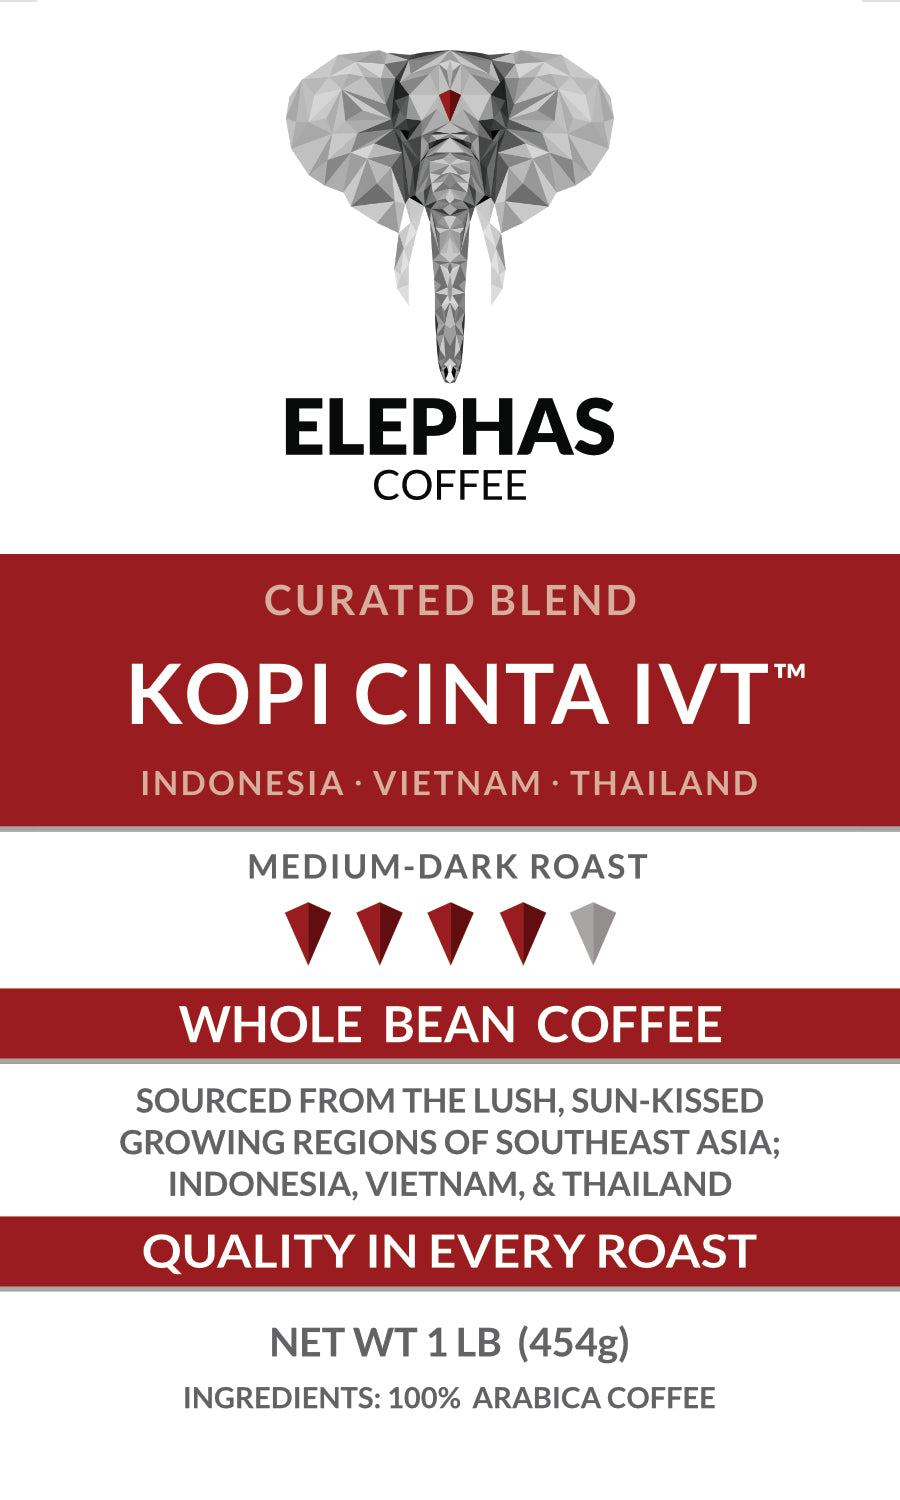 Kopi Cinta IVT - Curated Coffee Blend From Elephas Coffee